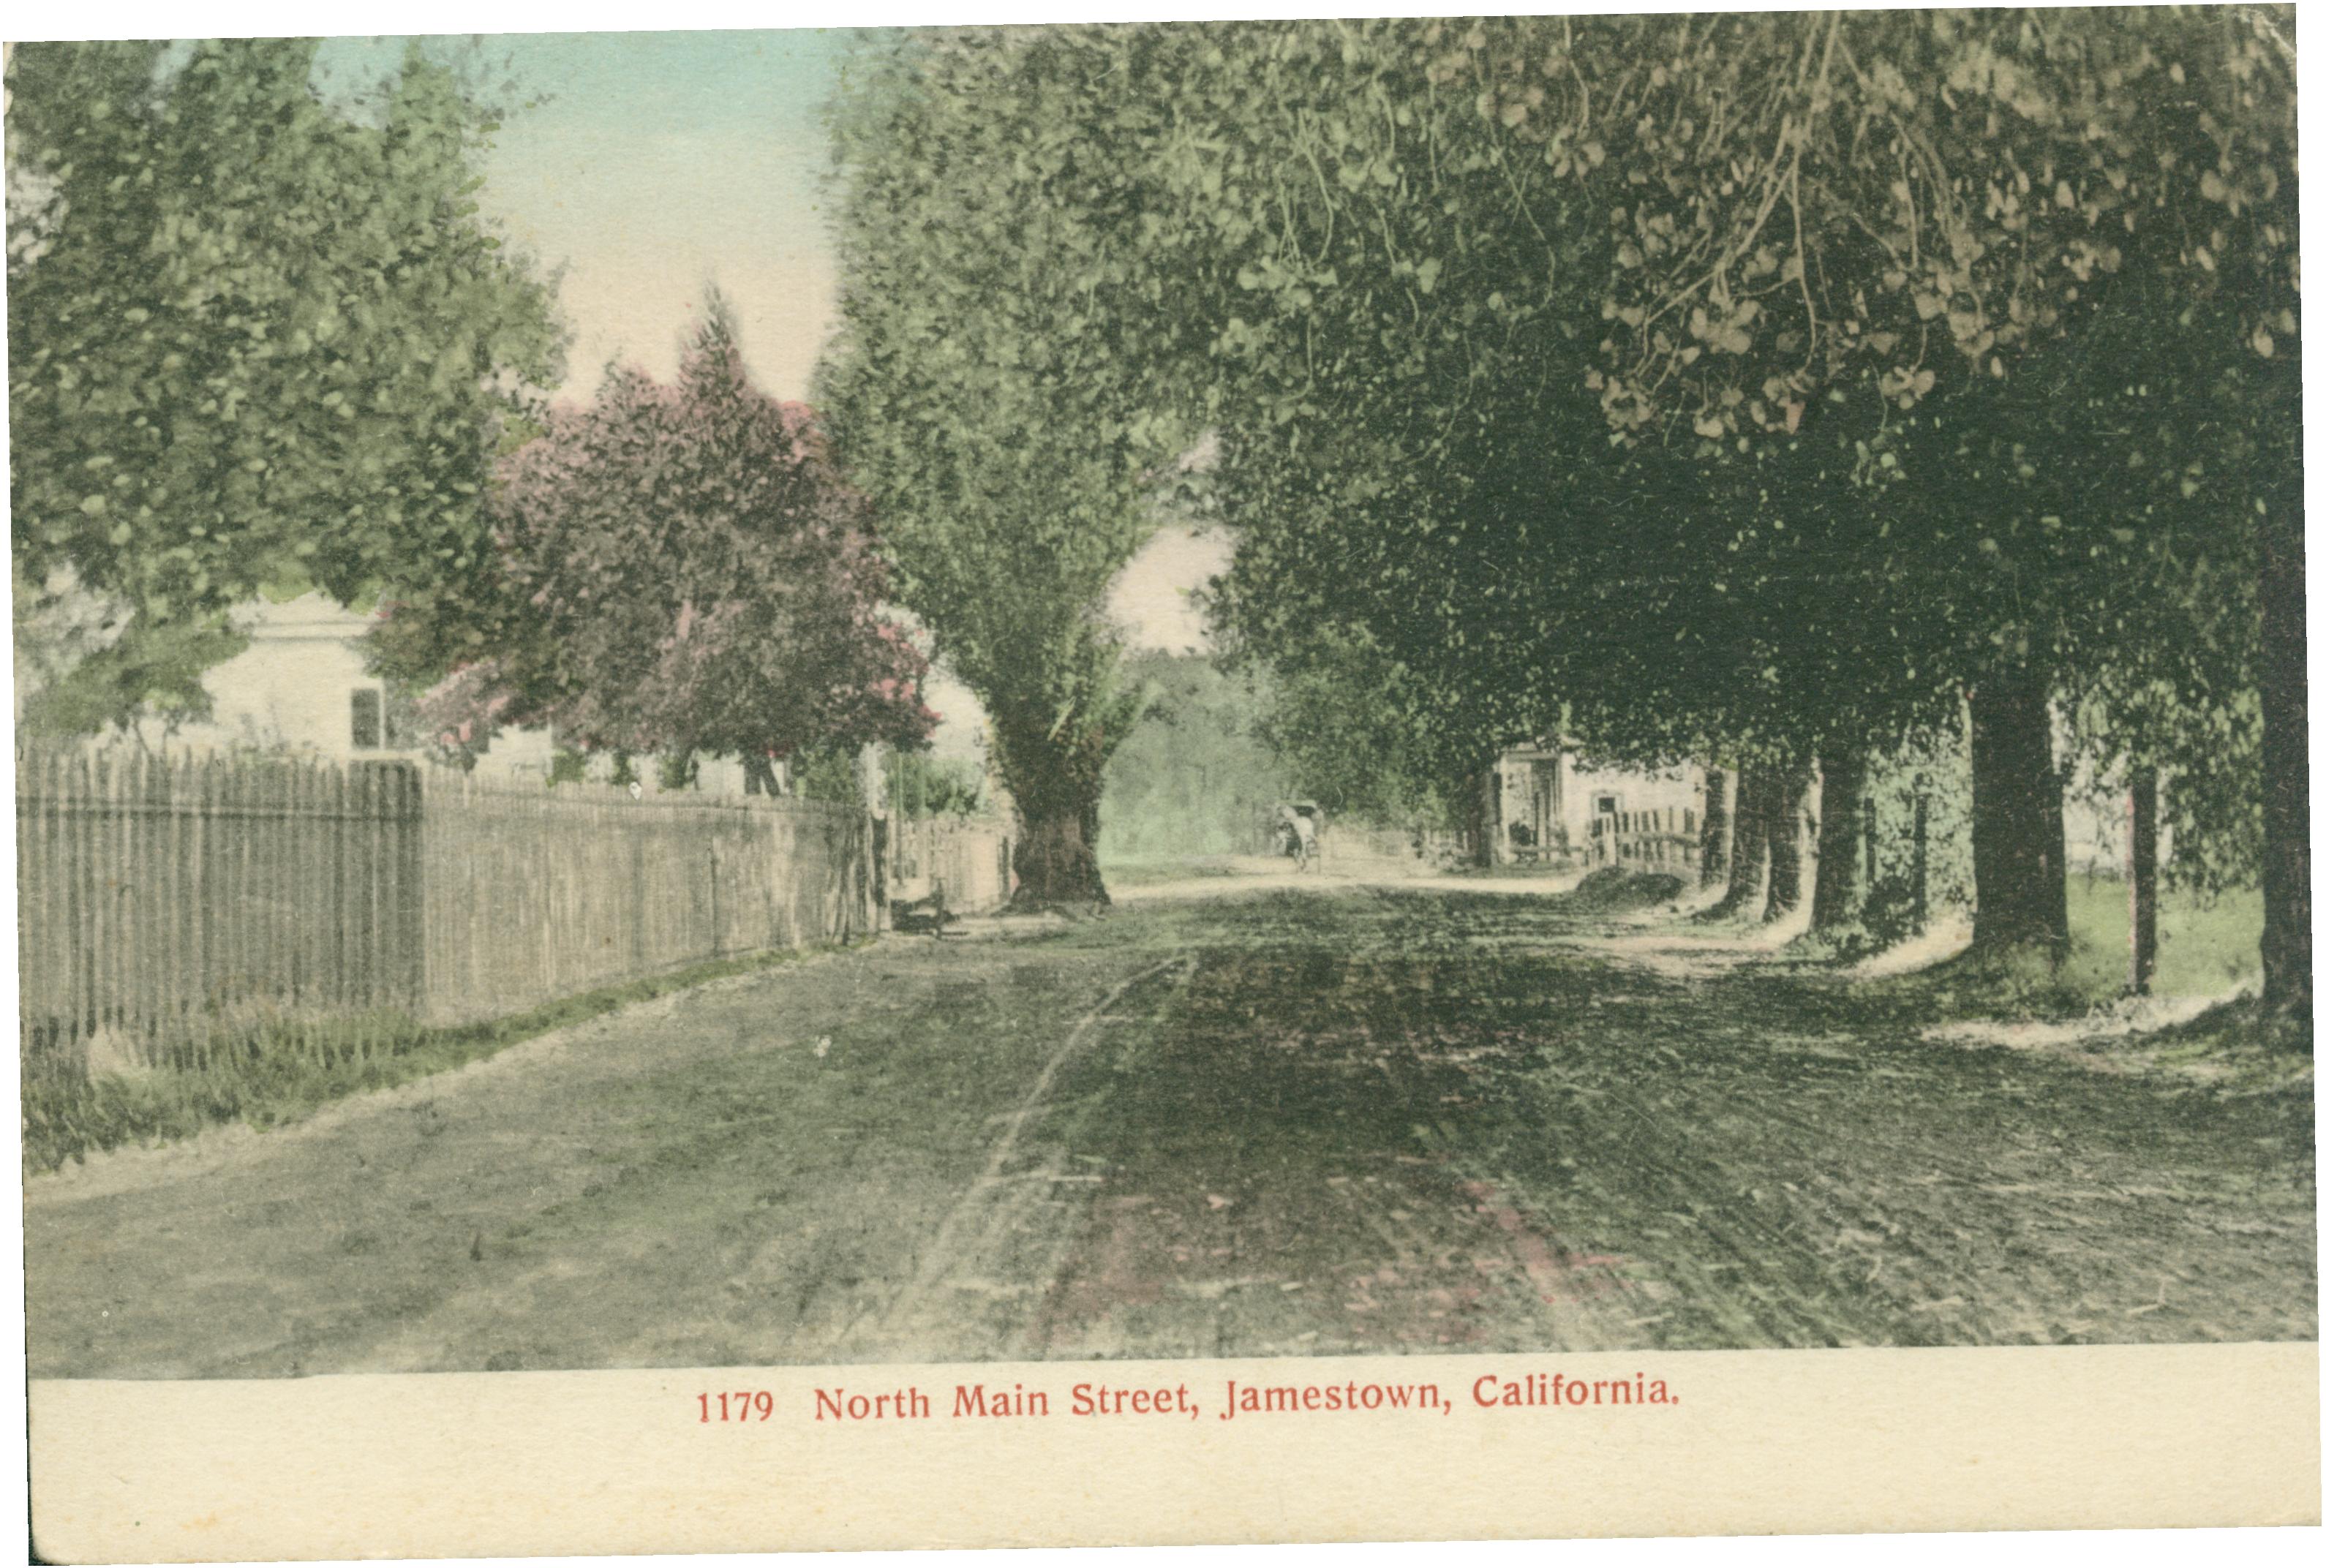 Shows a street in Jamestown lined by trees fences and a few buildings